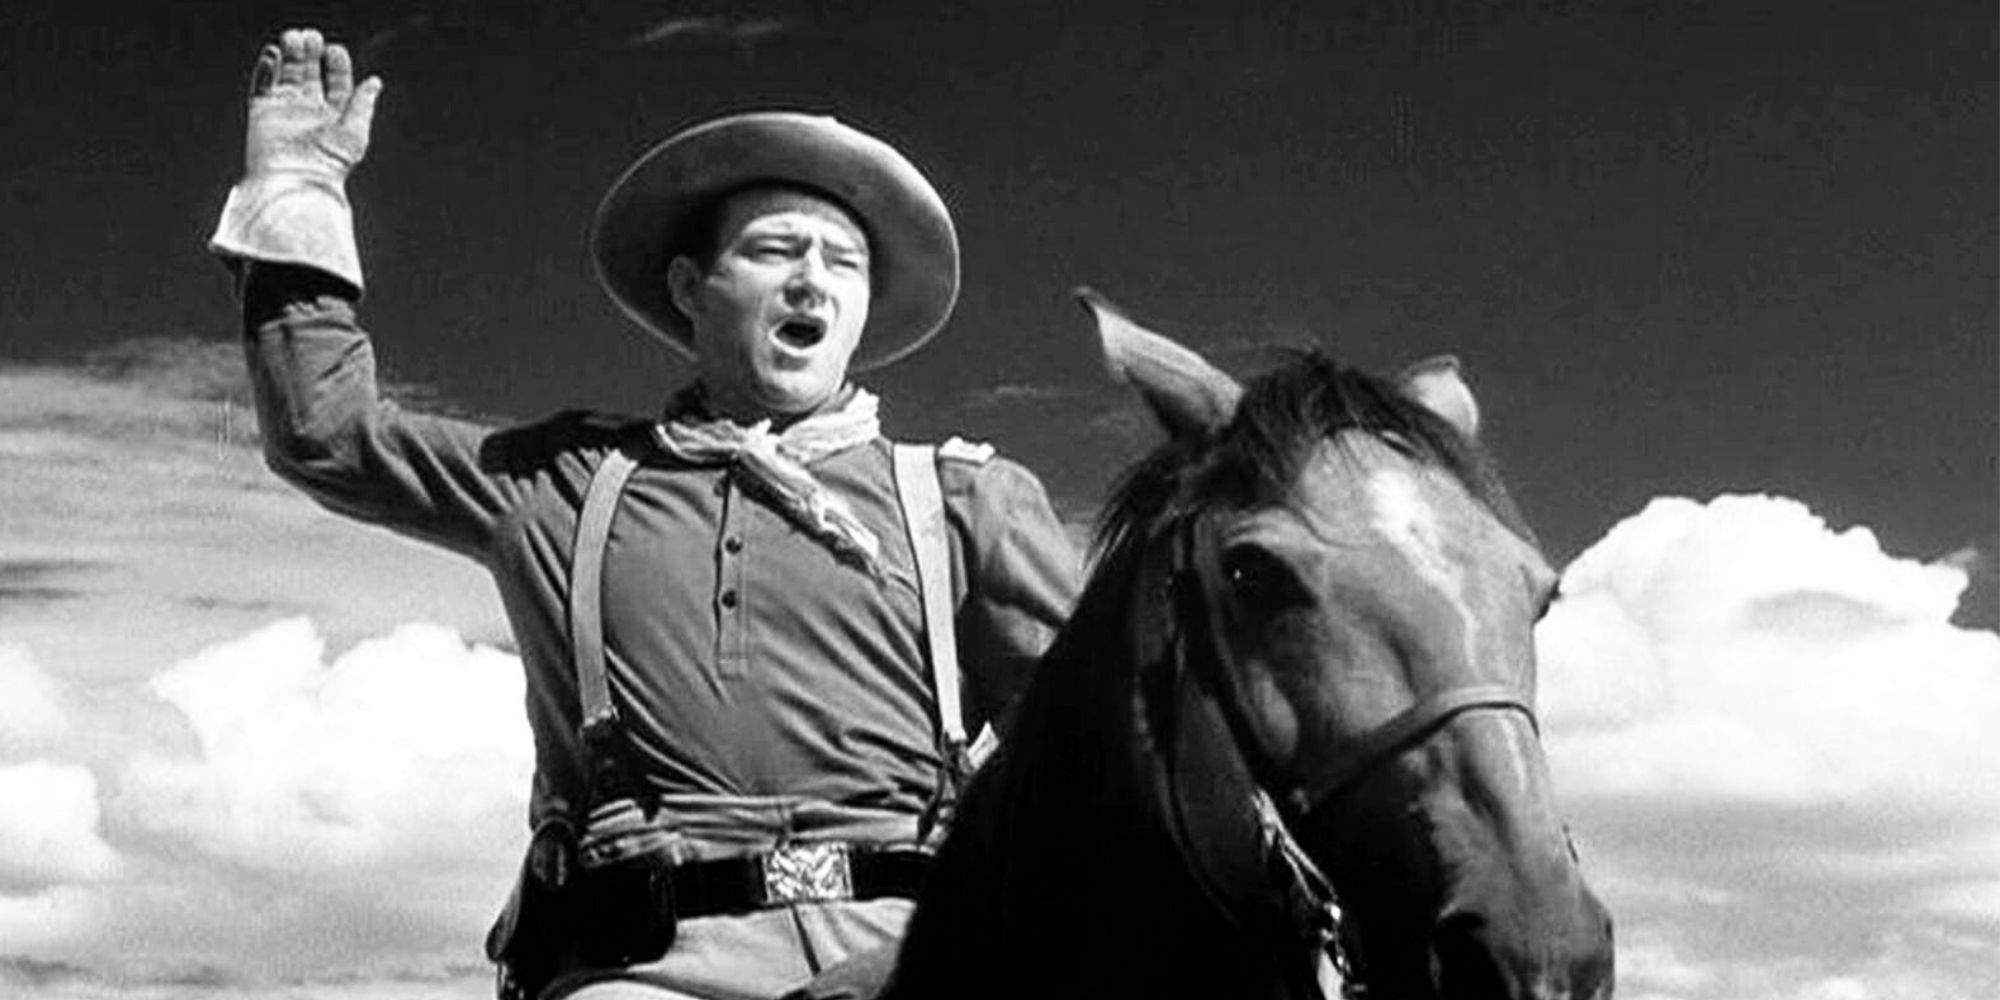 John Wayne as Captain Kirby York on horseback signaling to a person offscreen in Fort Apache (1948)